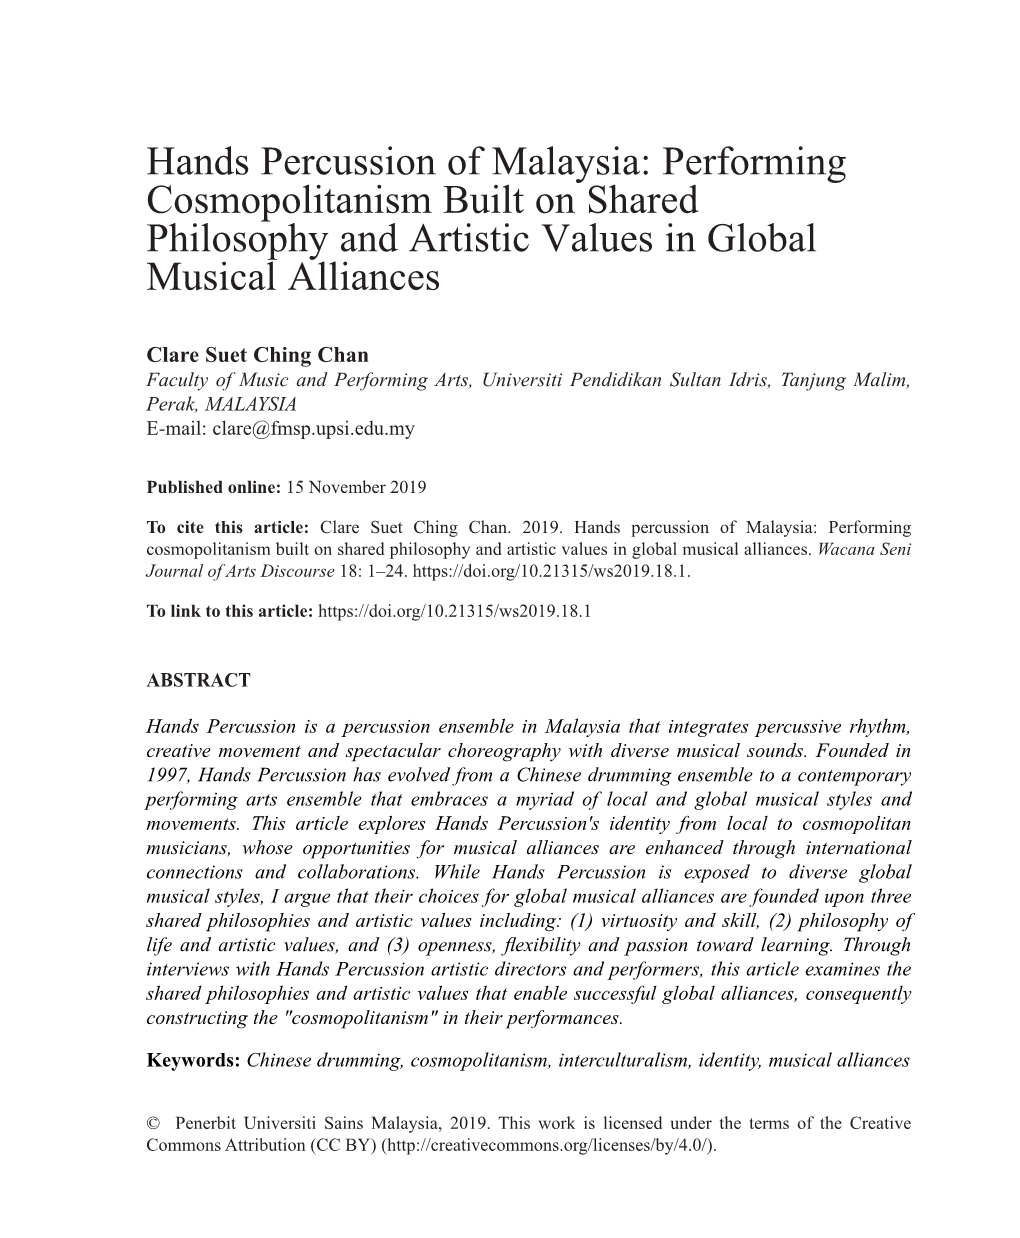 Hands Percussion of Malaysia: Performing Cosmopolitanism Built on Shared Philosophy and Artistic Values in Global Musical Alliances